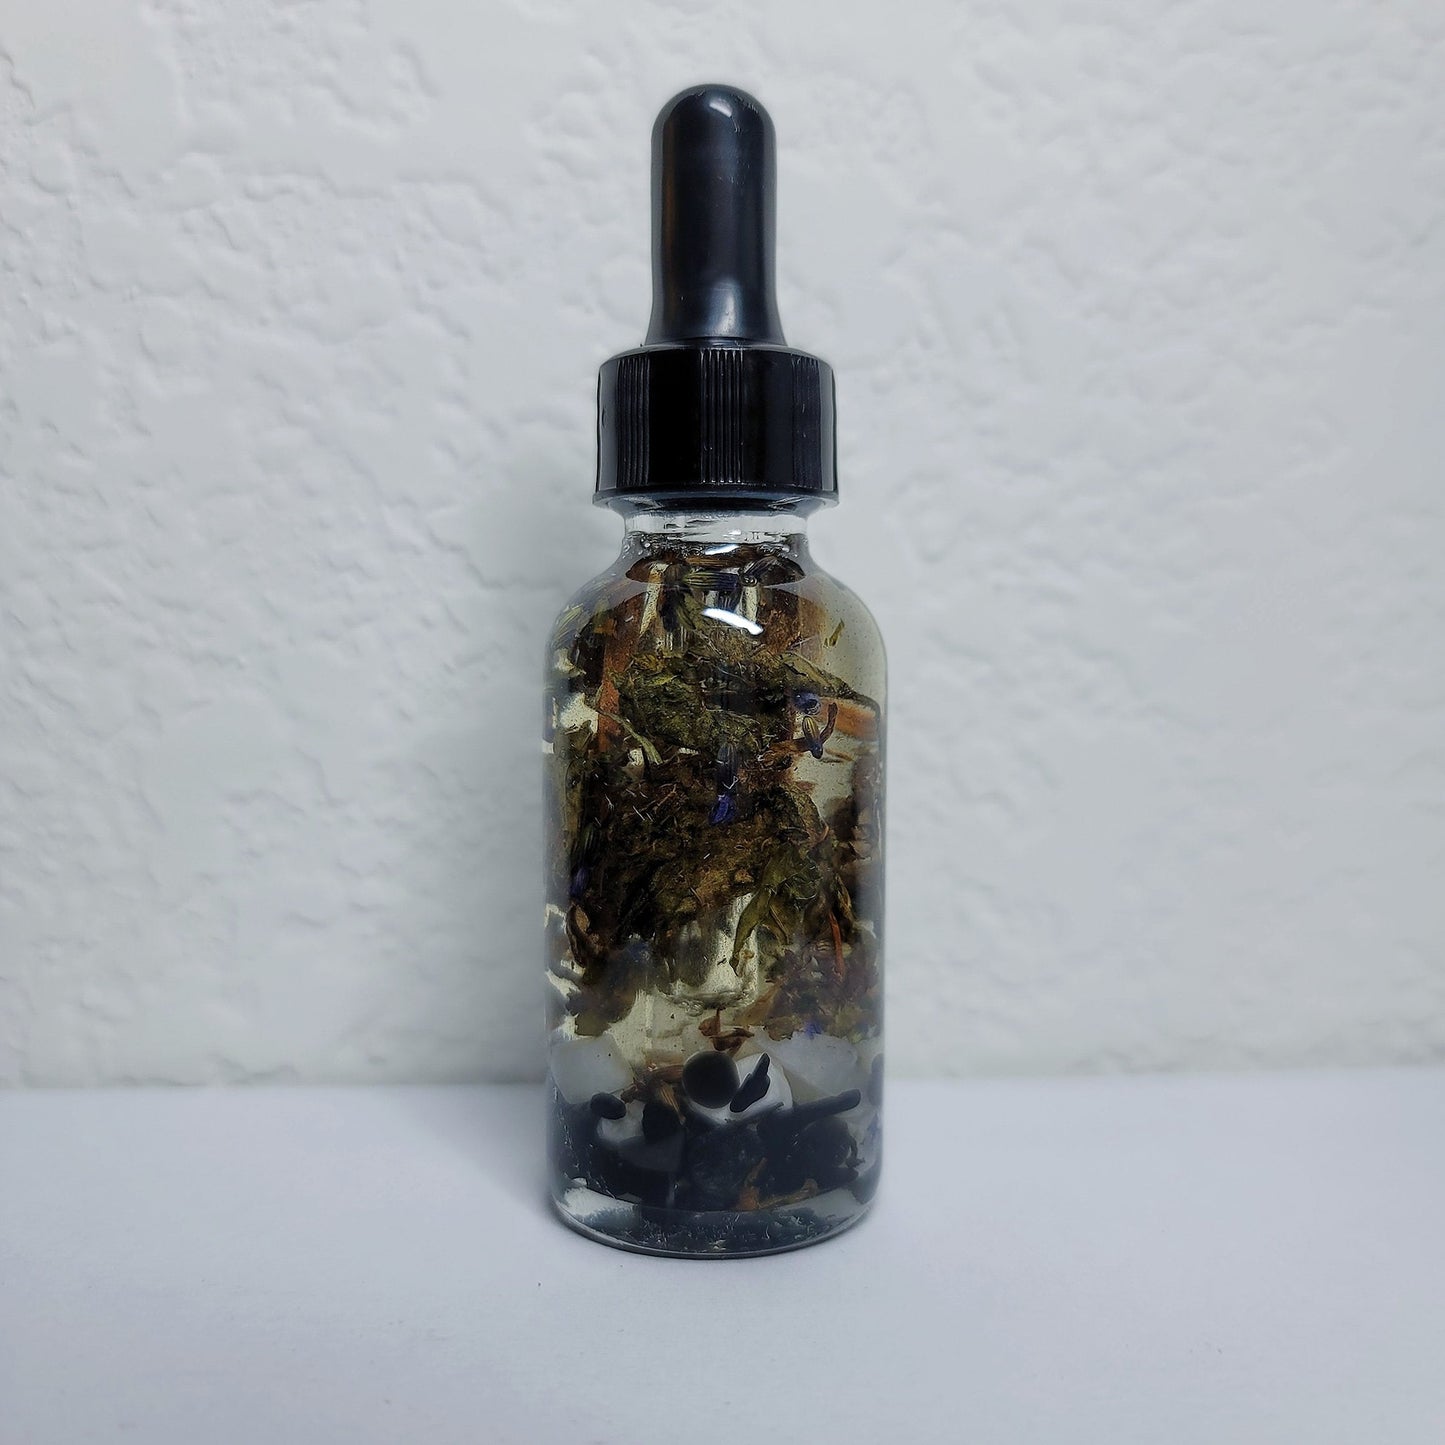 Nyx Primordial Goddess Oil | Ritual & Spell Work, Altars, Invocation, Manifestation, and Intentions